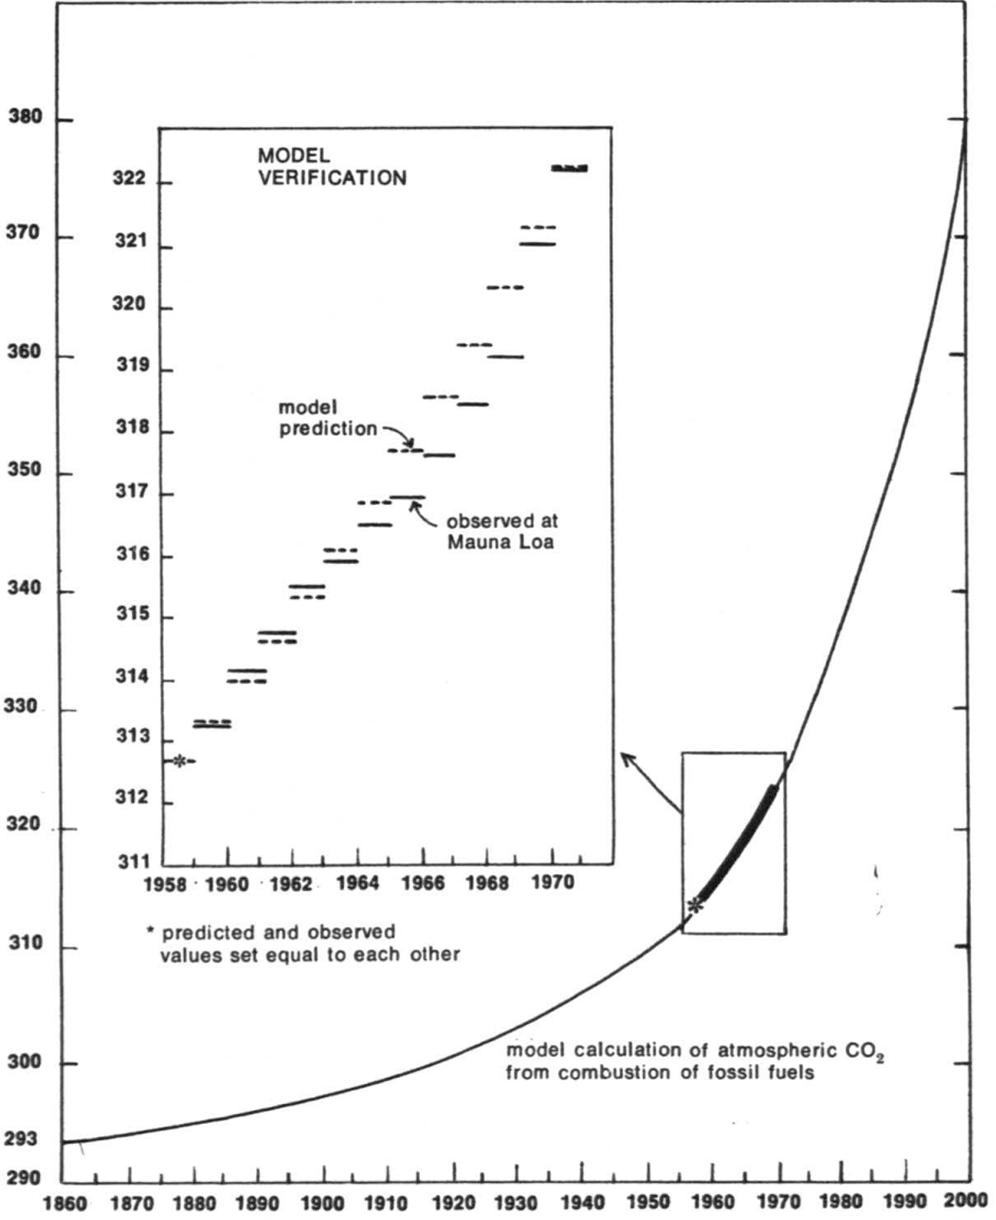 Plot showing predicted and observed CO2 concentrations predicted by a LtG model. The model predicts a drastic rise from 322 ppm in 1971 to 380 ppm by 2000.